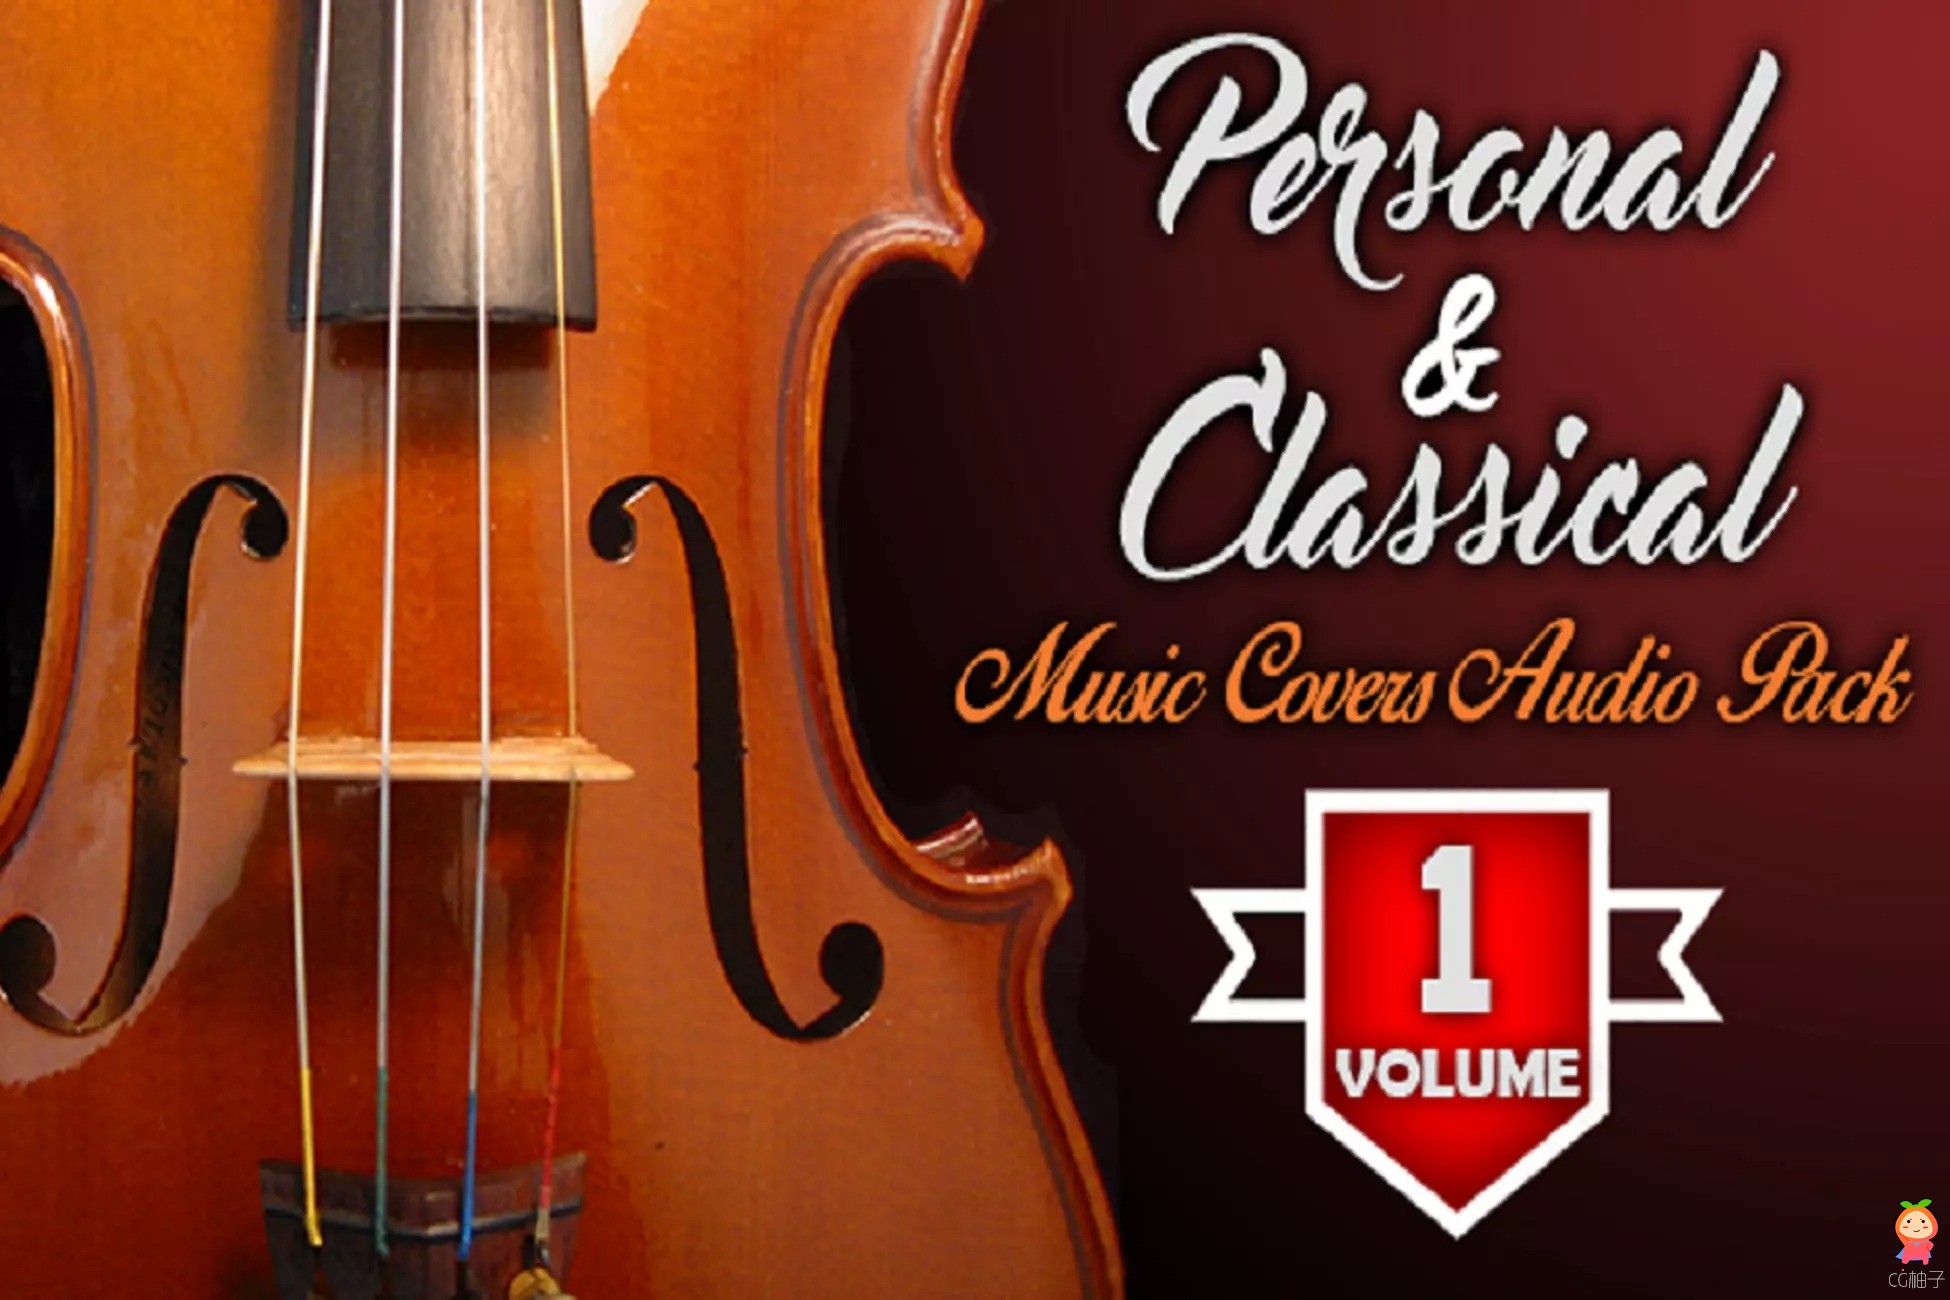 Personal & Classical Music Covers 